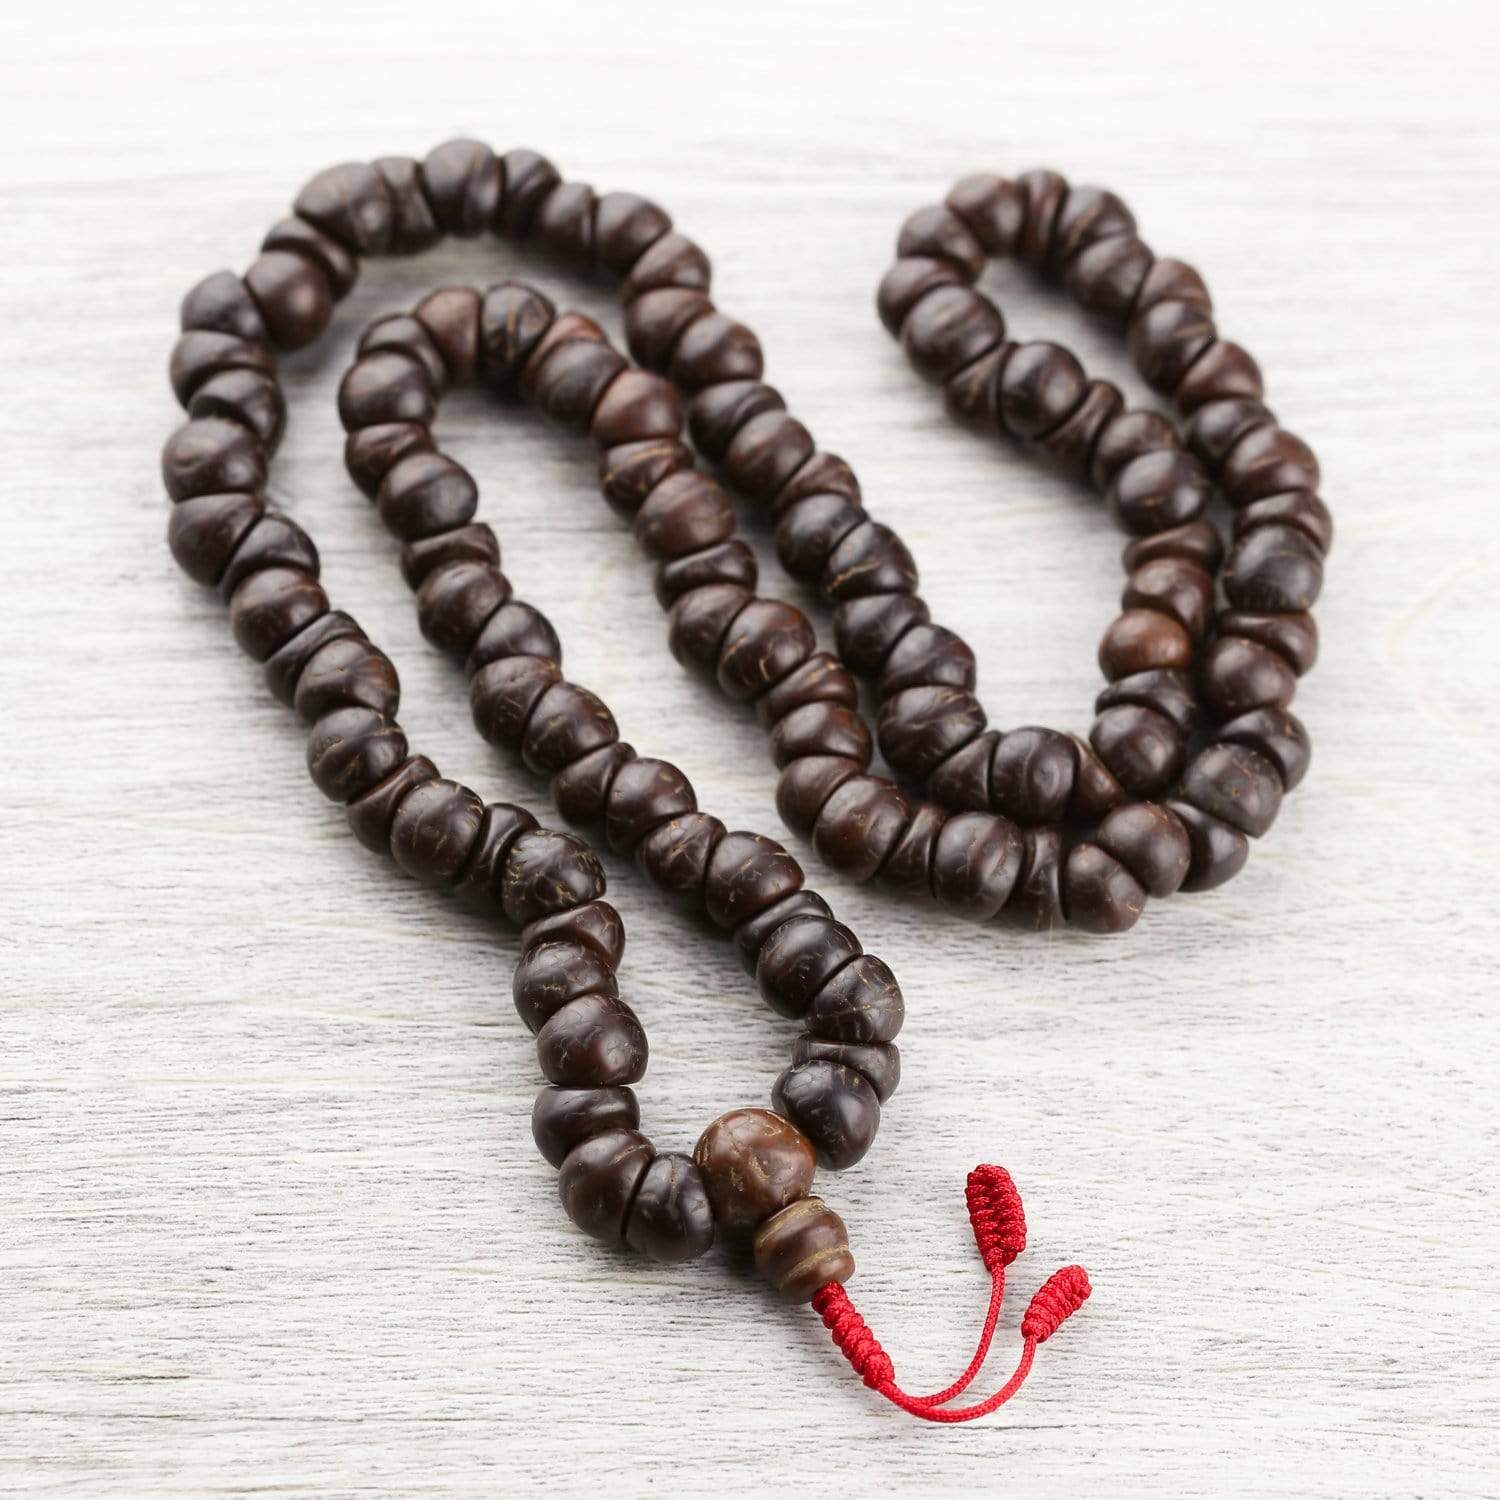 GCMR Bodhi Seed Mala For Meditation Shell Necklace Price in India